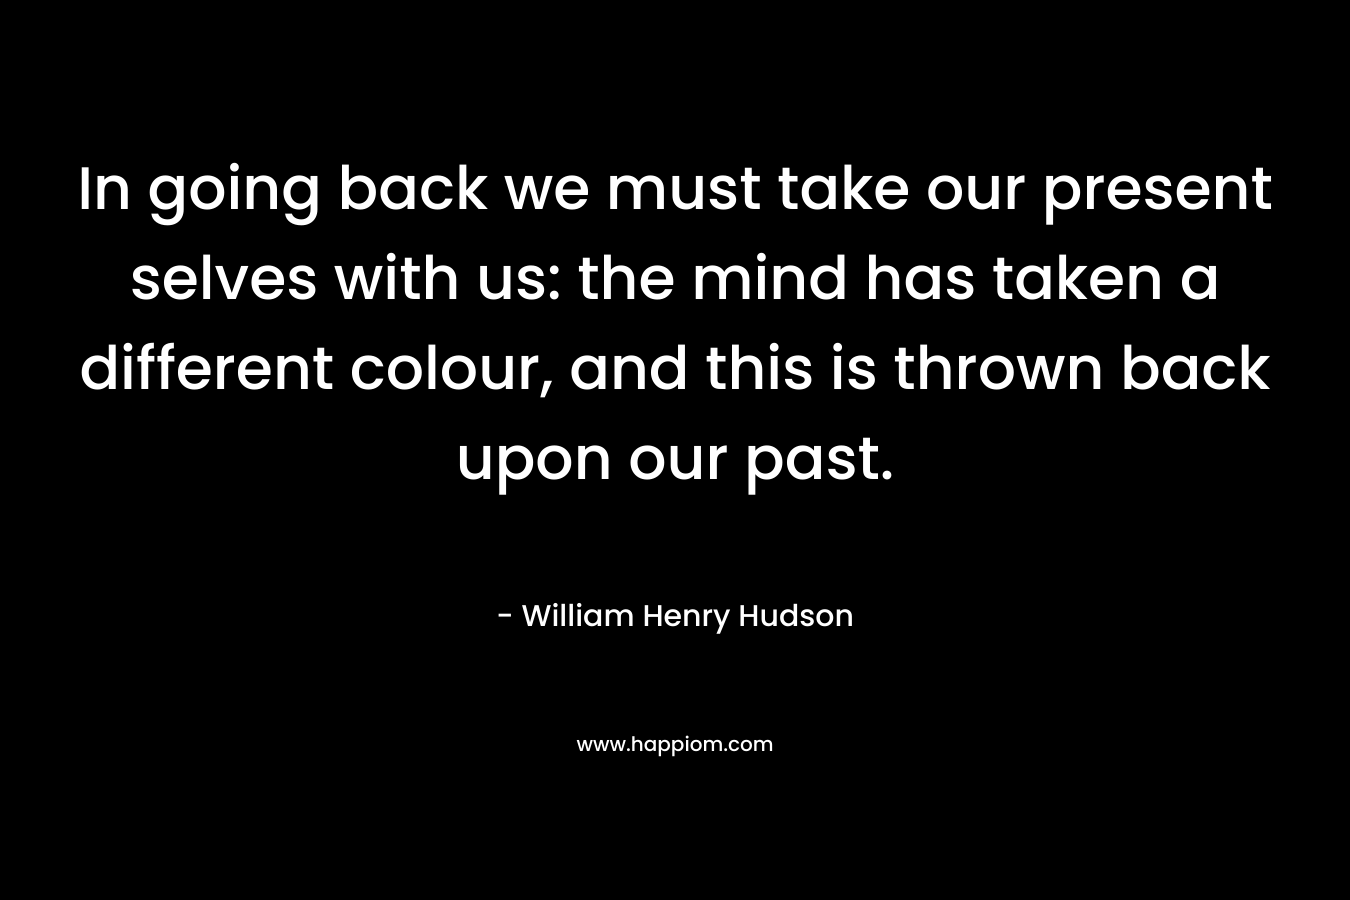 In going back we must take our present selves with us: the mind has taken a different colour, and this is thrown back upon our past. – William Henry Hudson